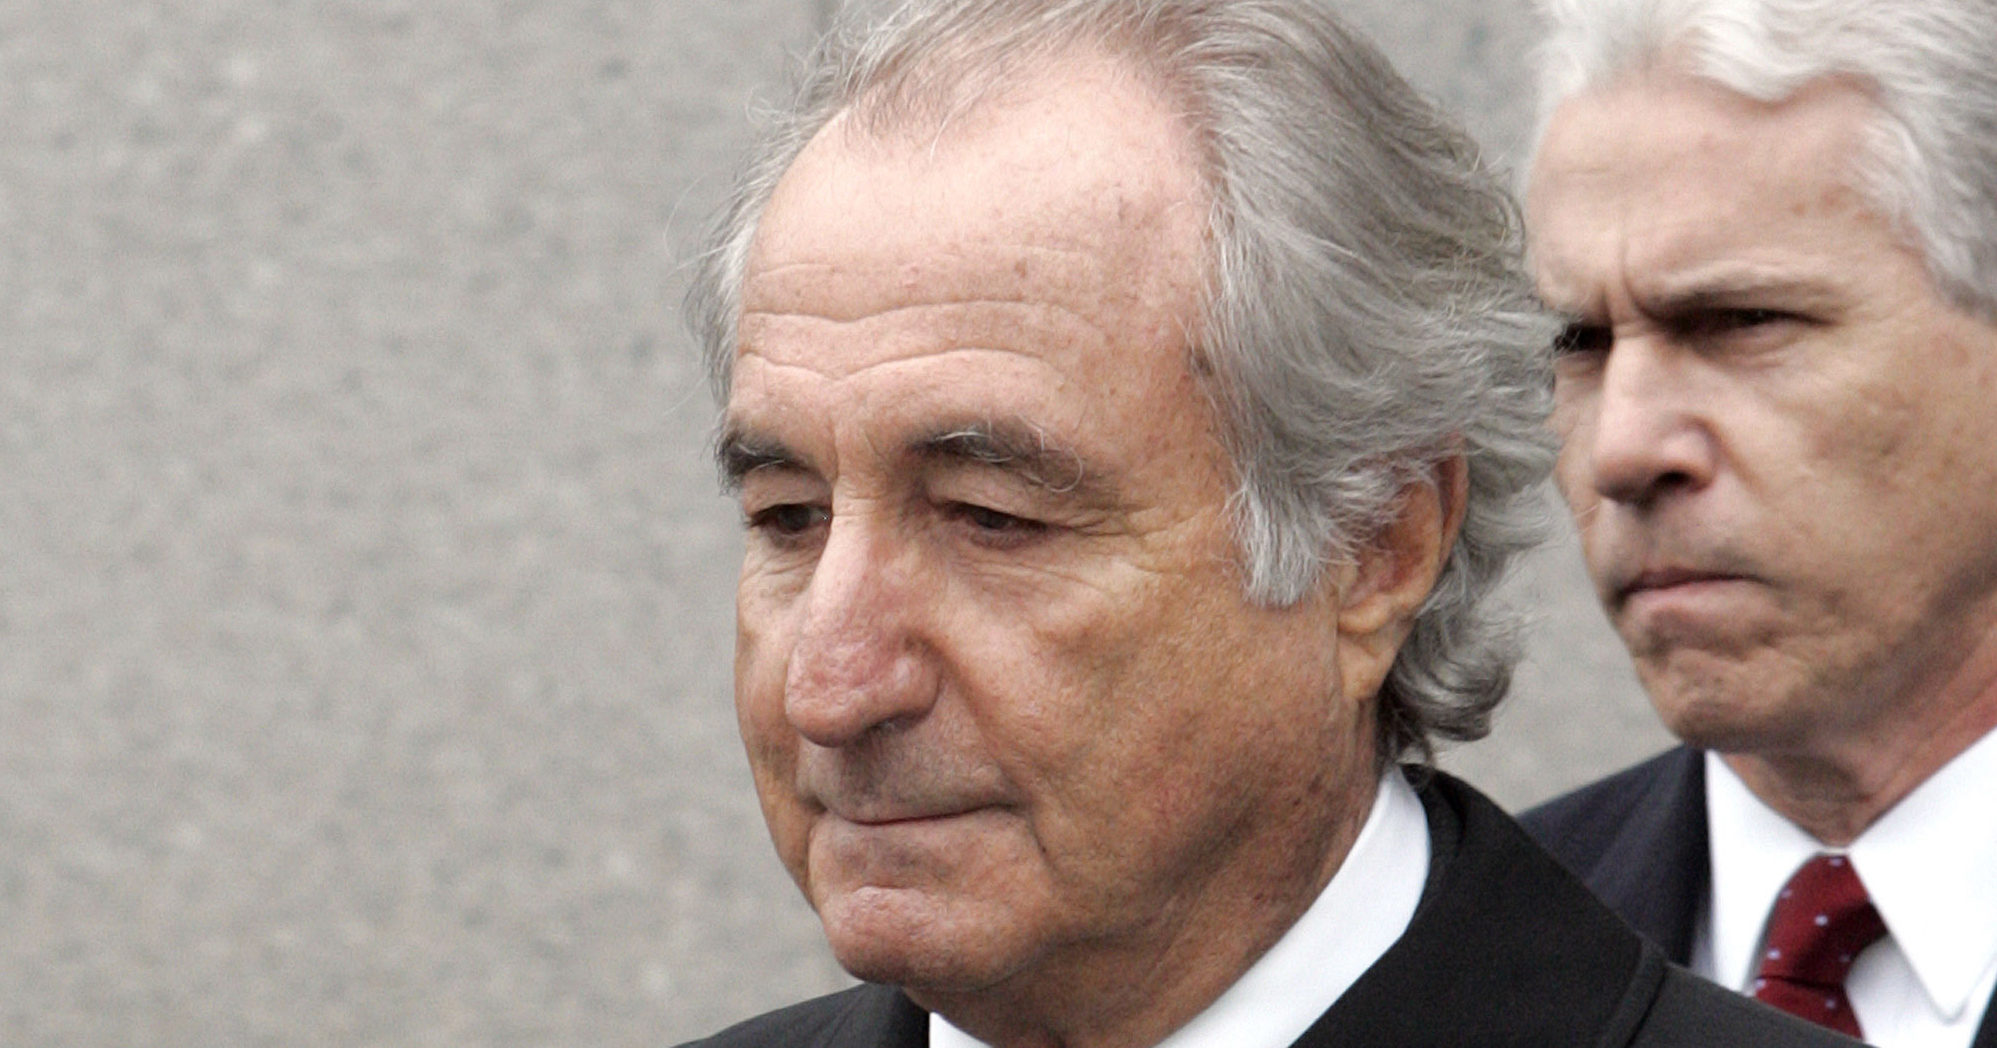 In this March 10, 2009, file photo, former financier Bernie Madoff exits federal court in Manhattan, in New York.